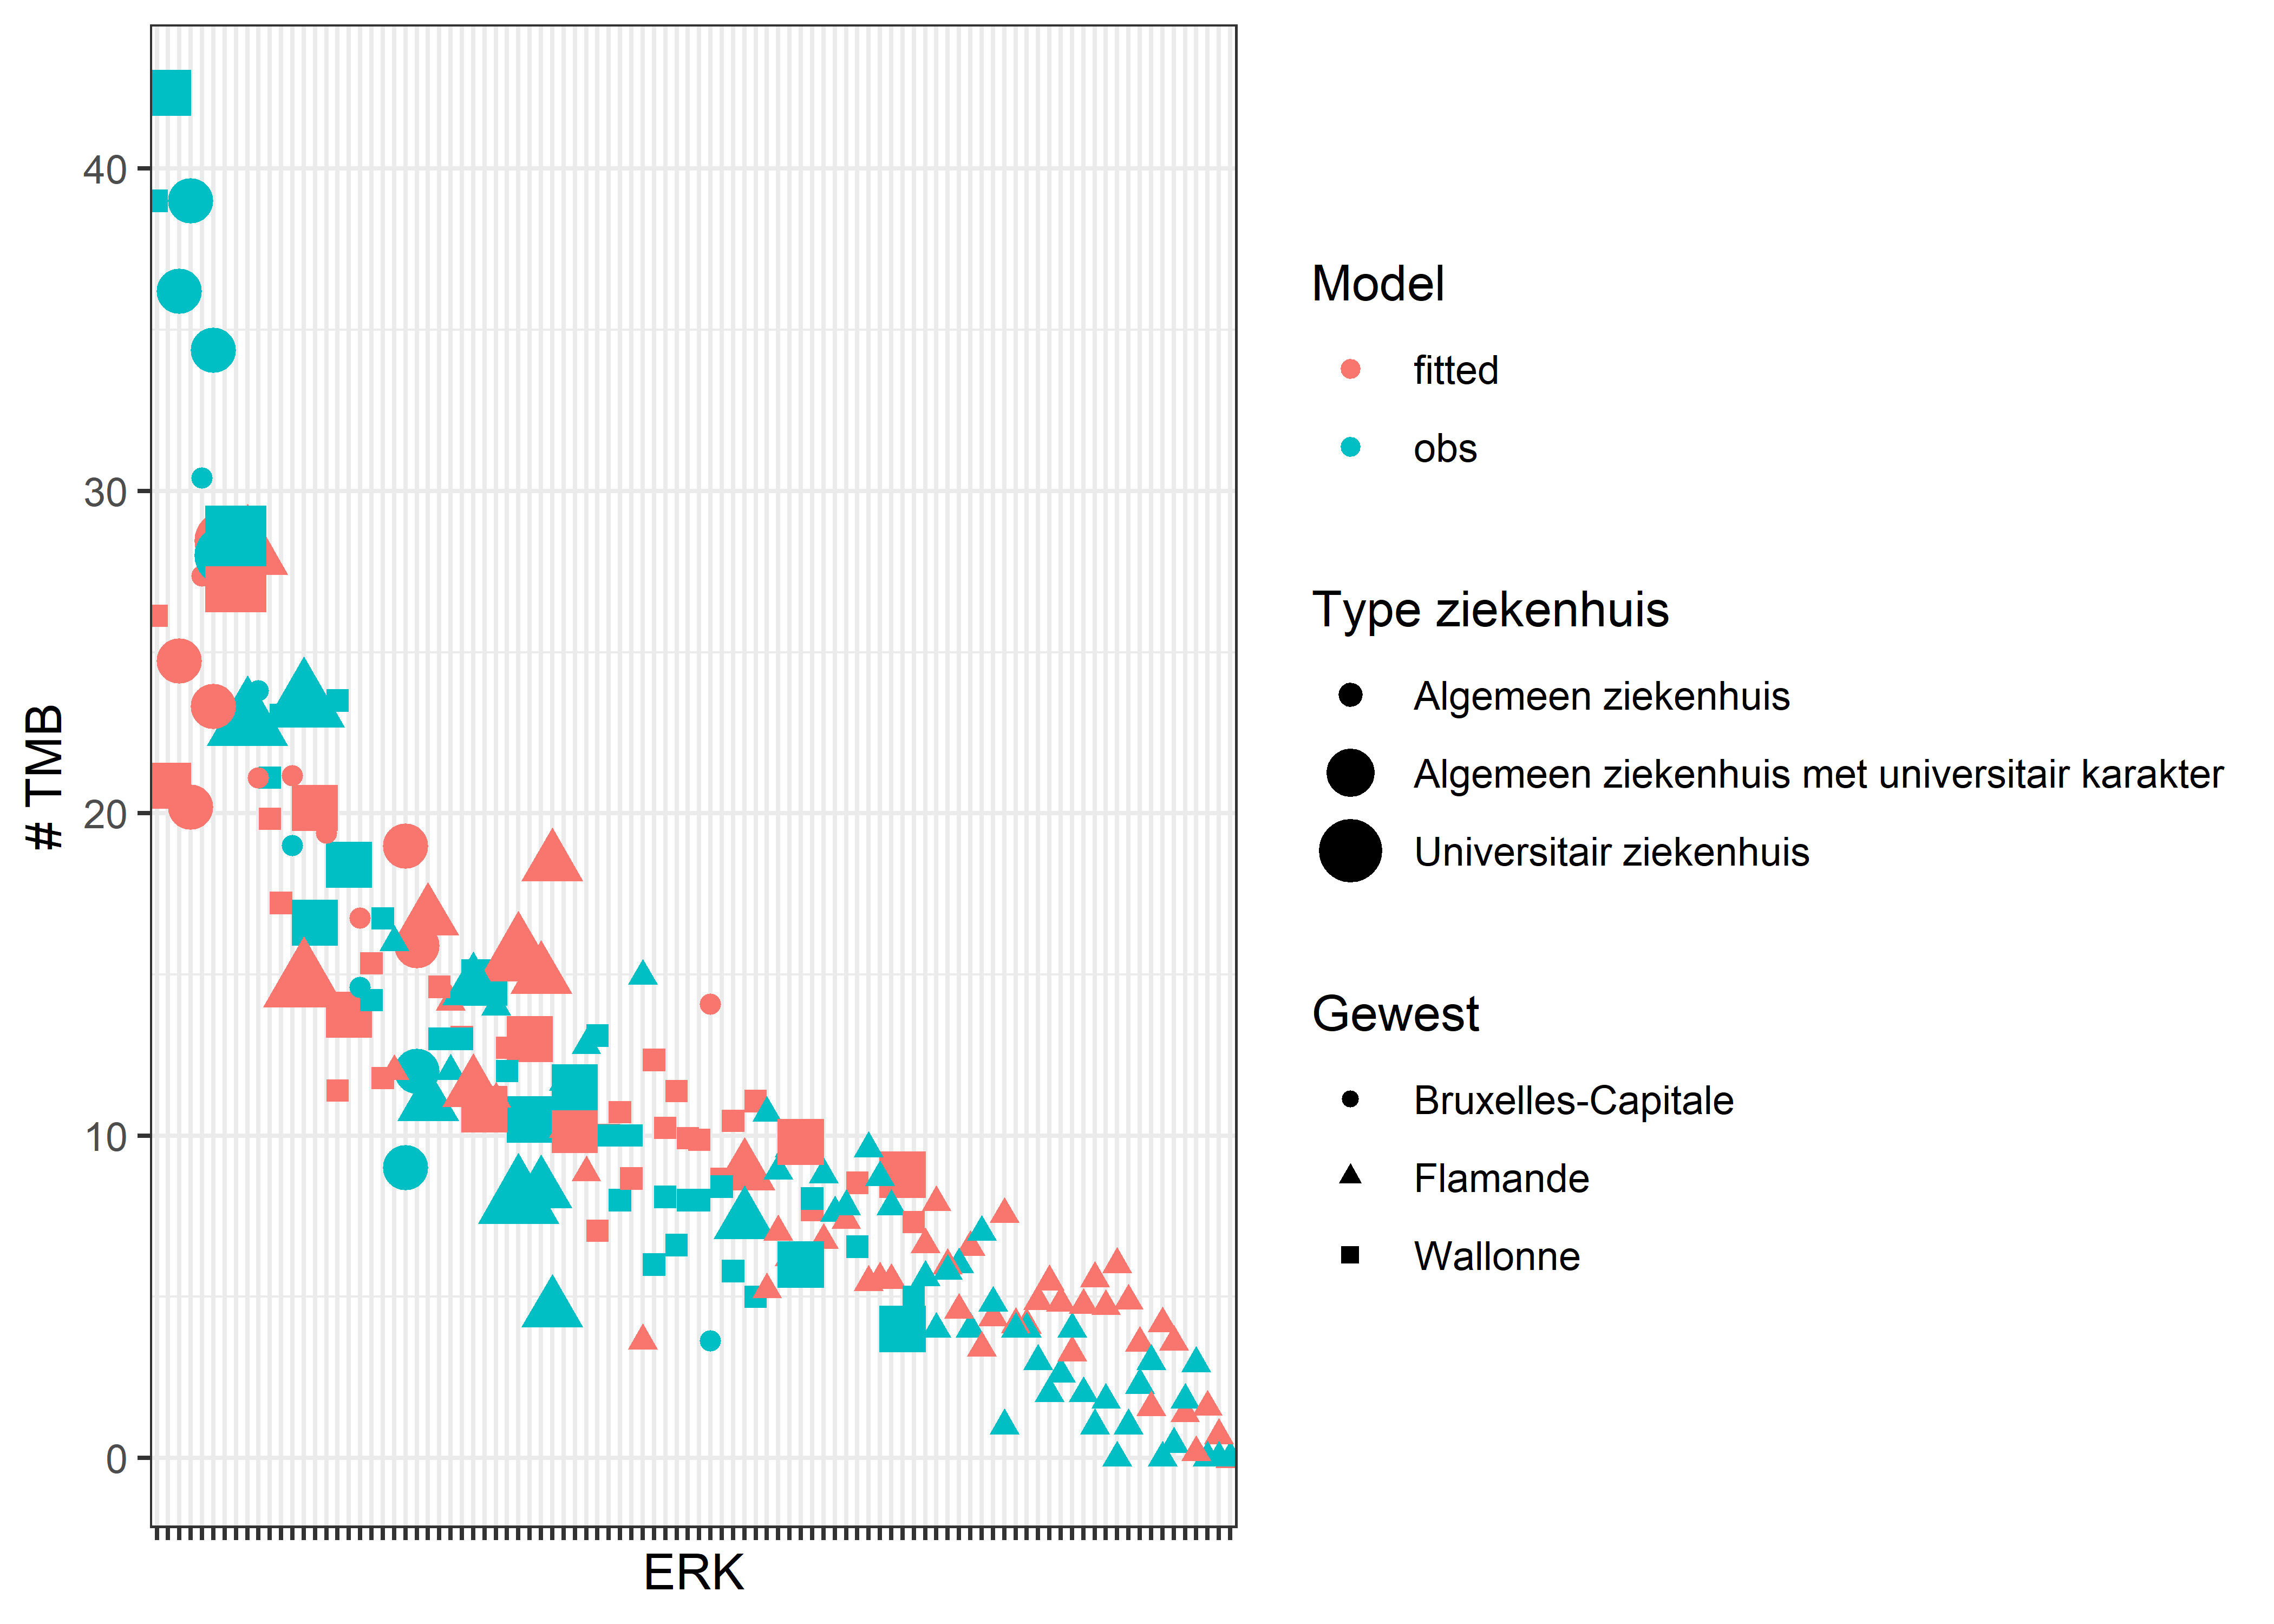 Fitted versus observed values